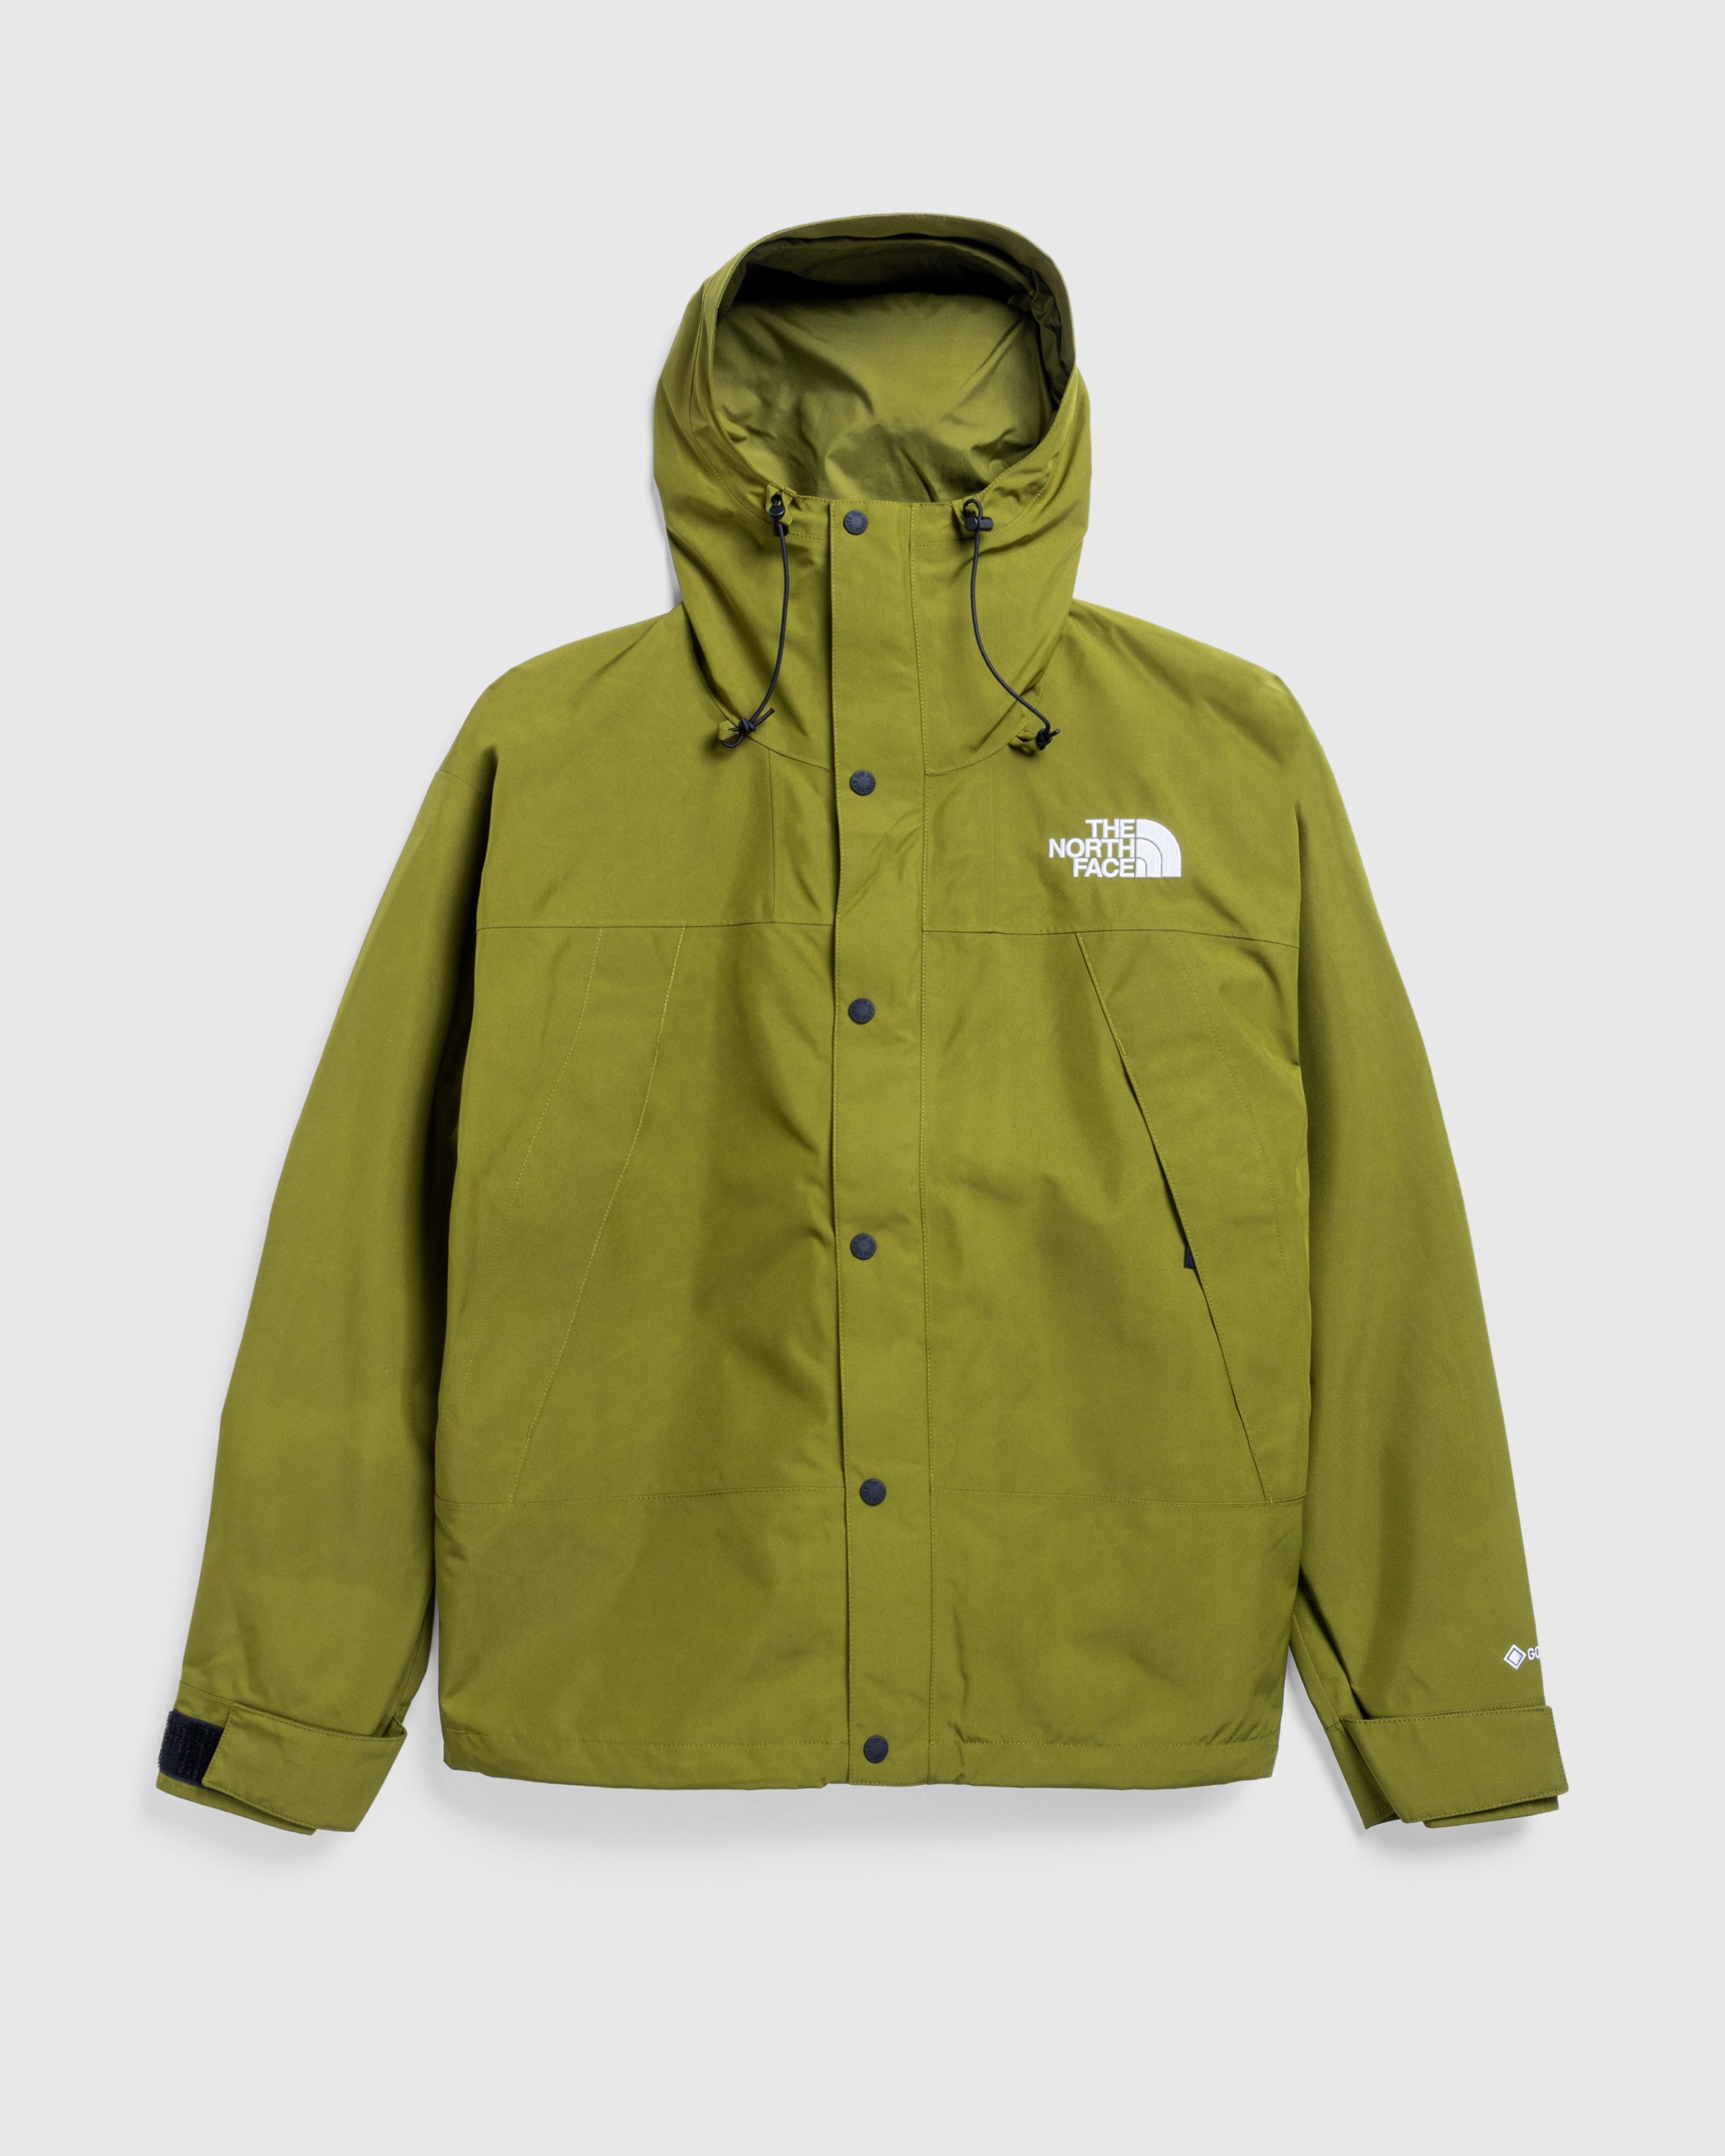 The North Face - M GTX MOUNTAIN JACKET FOREST OLIVE - Clothing - Green - Image 1